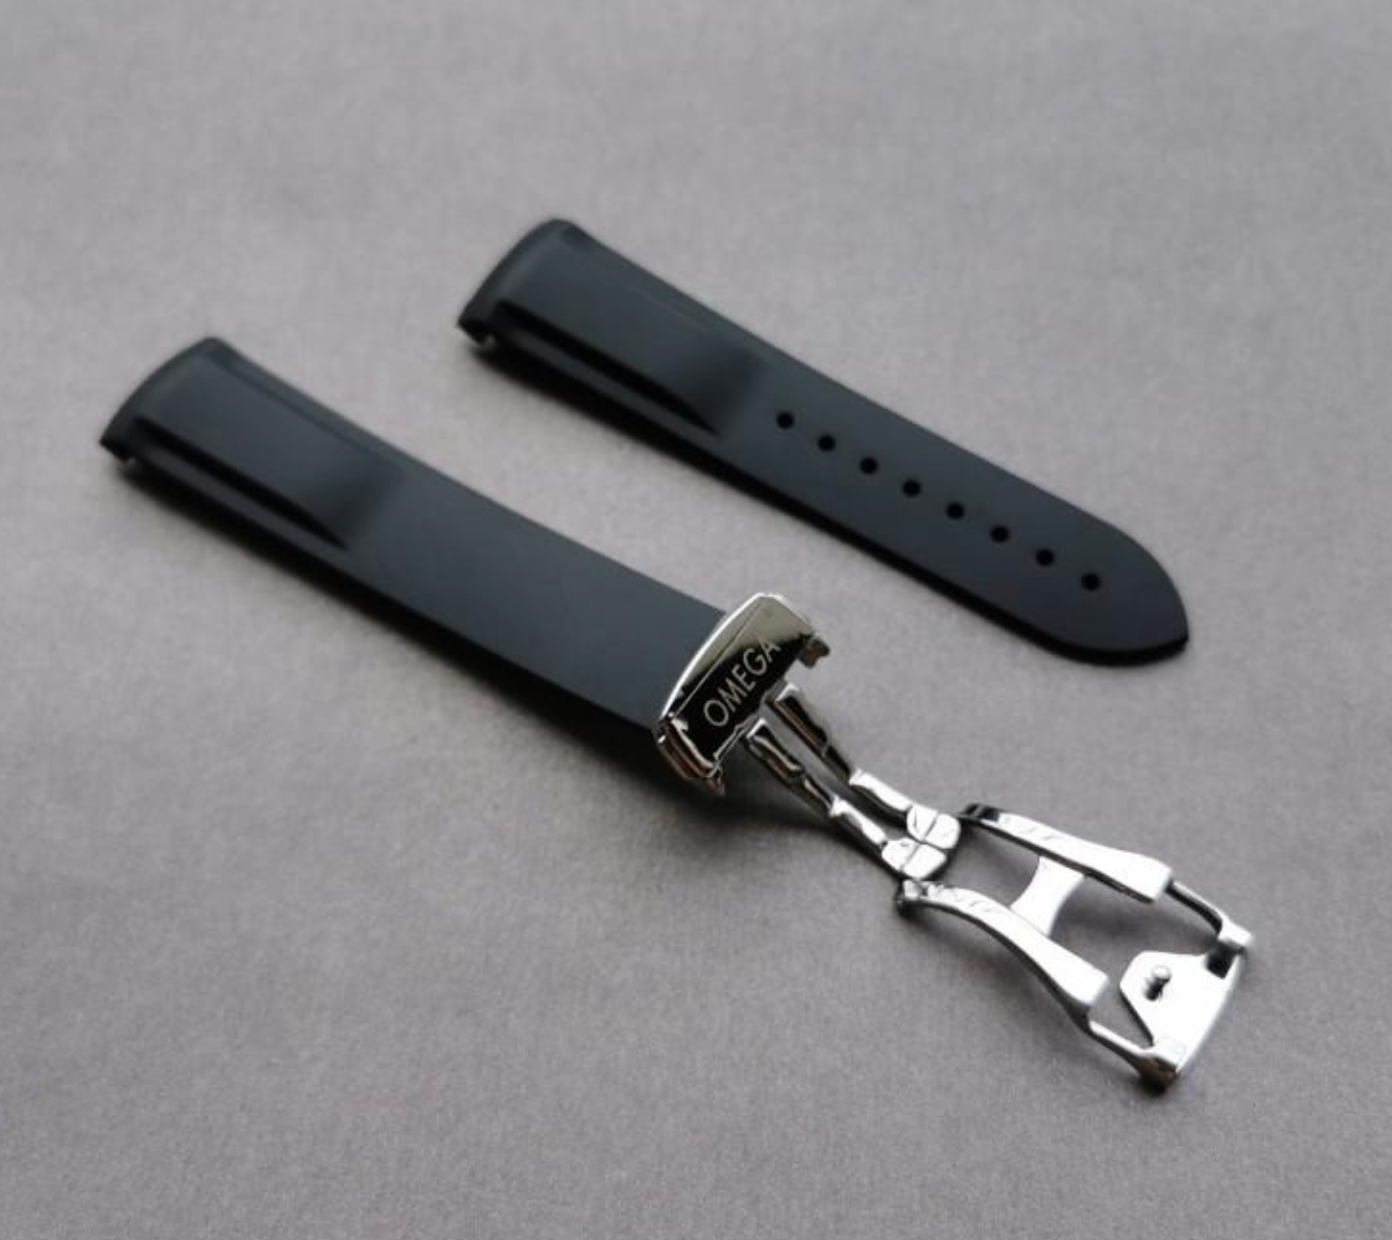 22mm Black Omega Rubber Band with Omega Foldover Deployment Clasp